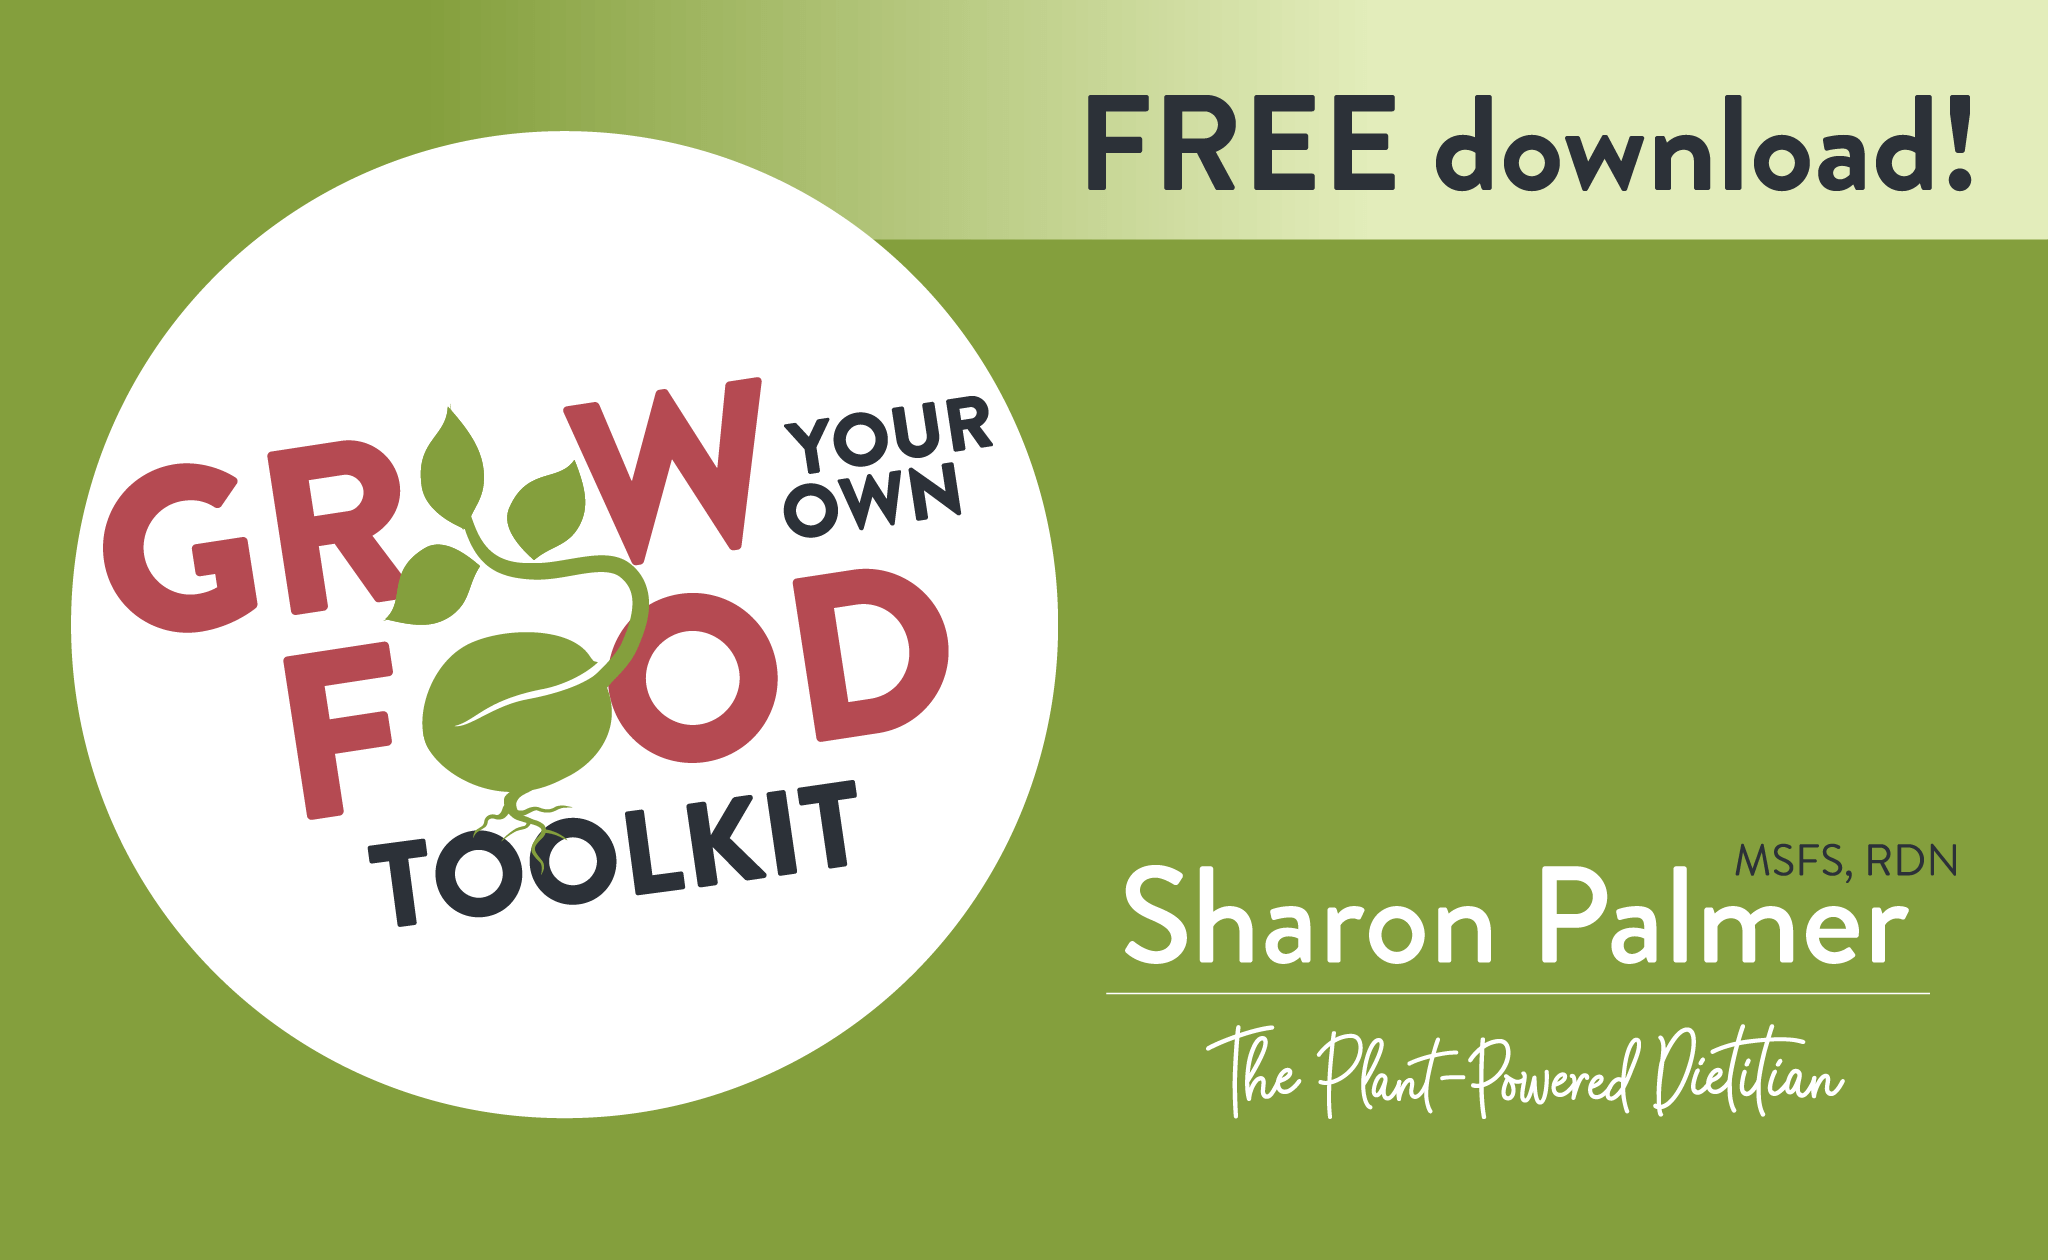 Grow Your Own Food Toolkit from Sharon Palmer, MSFS, RDN